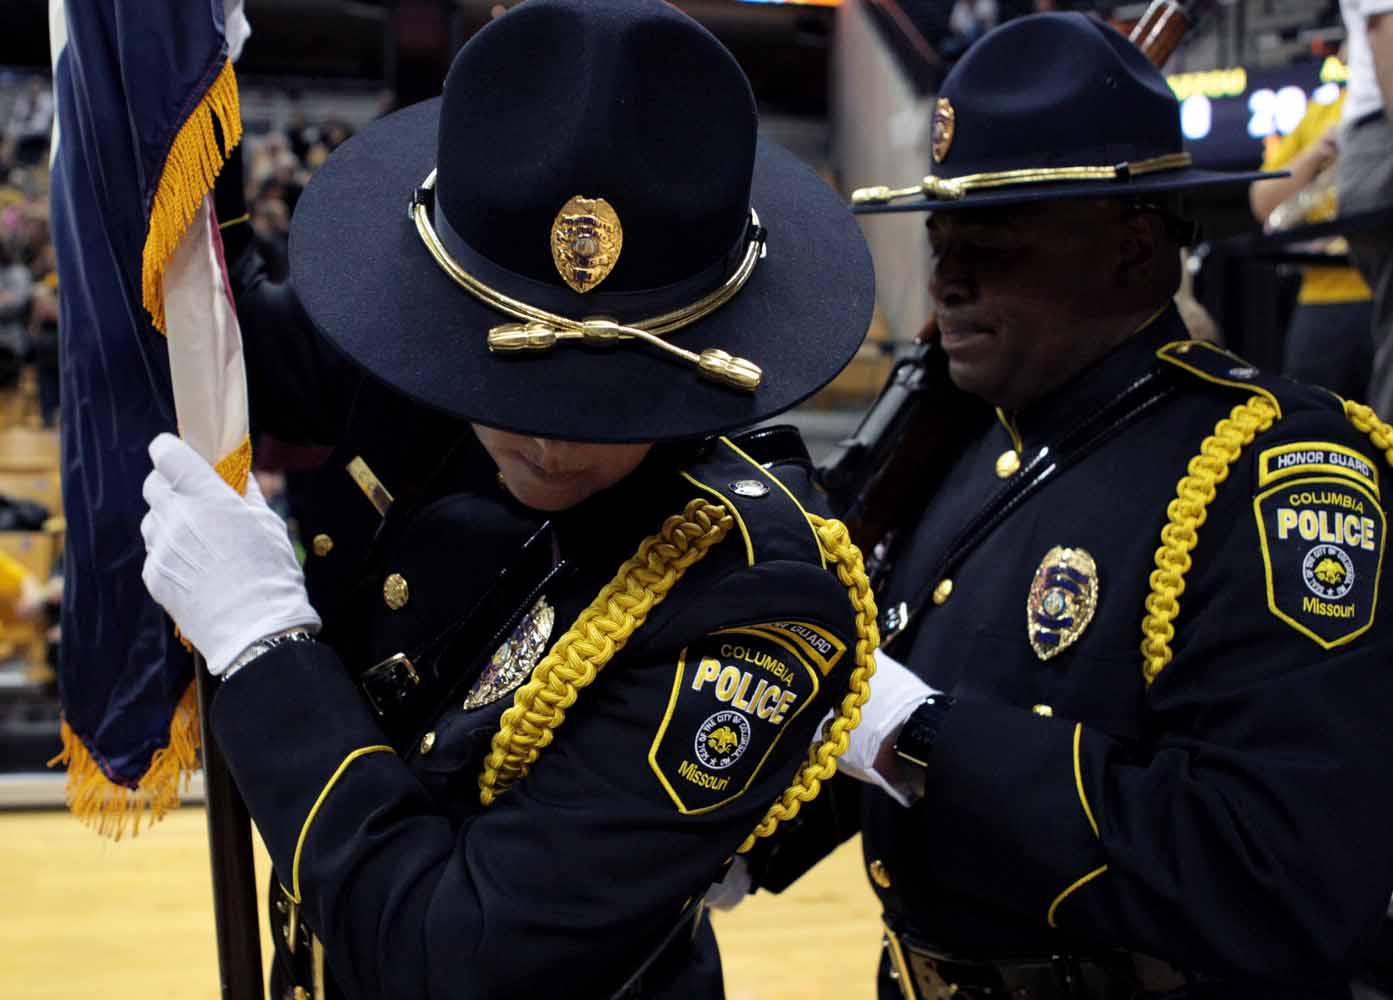 Members of the Honor Guard prepare to take the court for the singing of the National Anthem Thursday evening, Feb. 11, 2016 at Mizzou Arena.